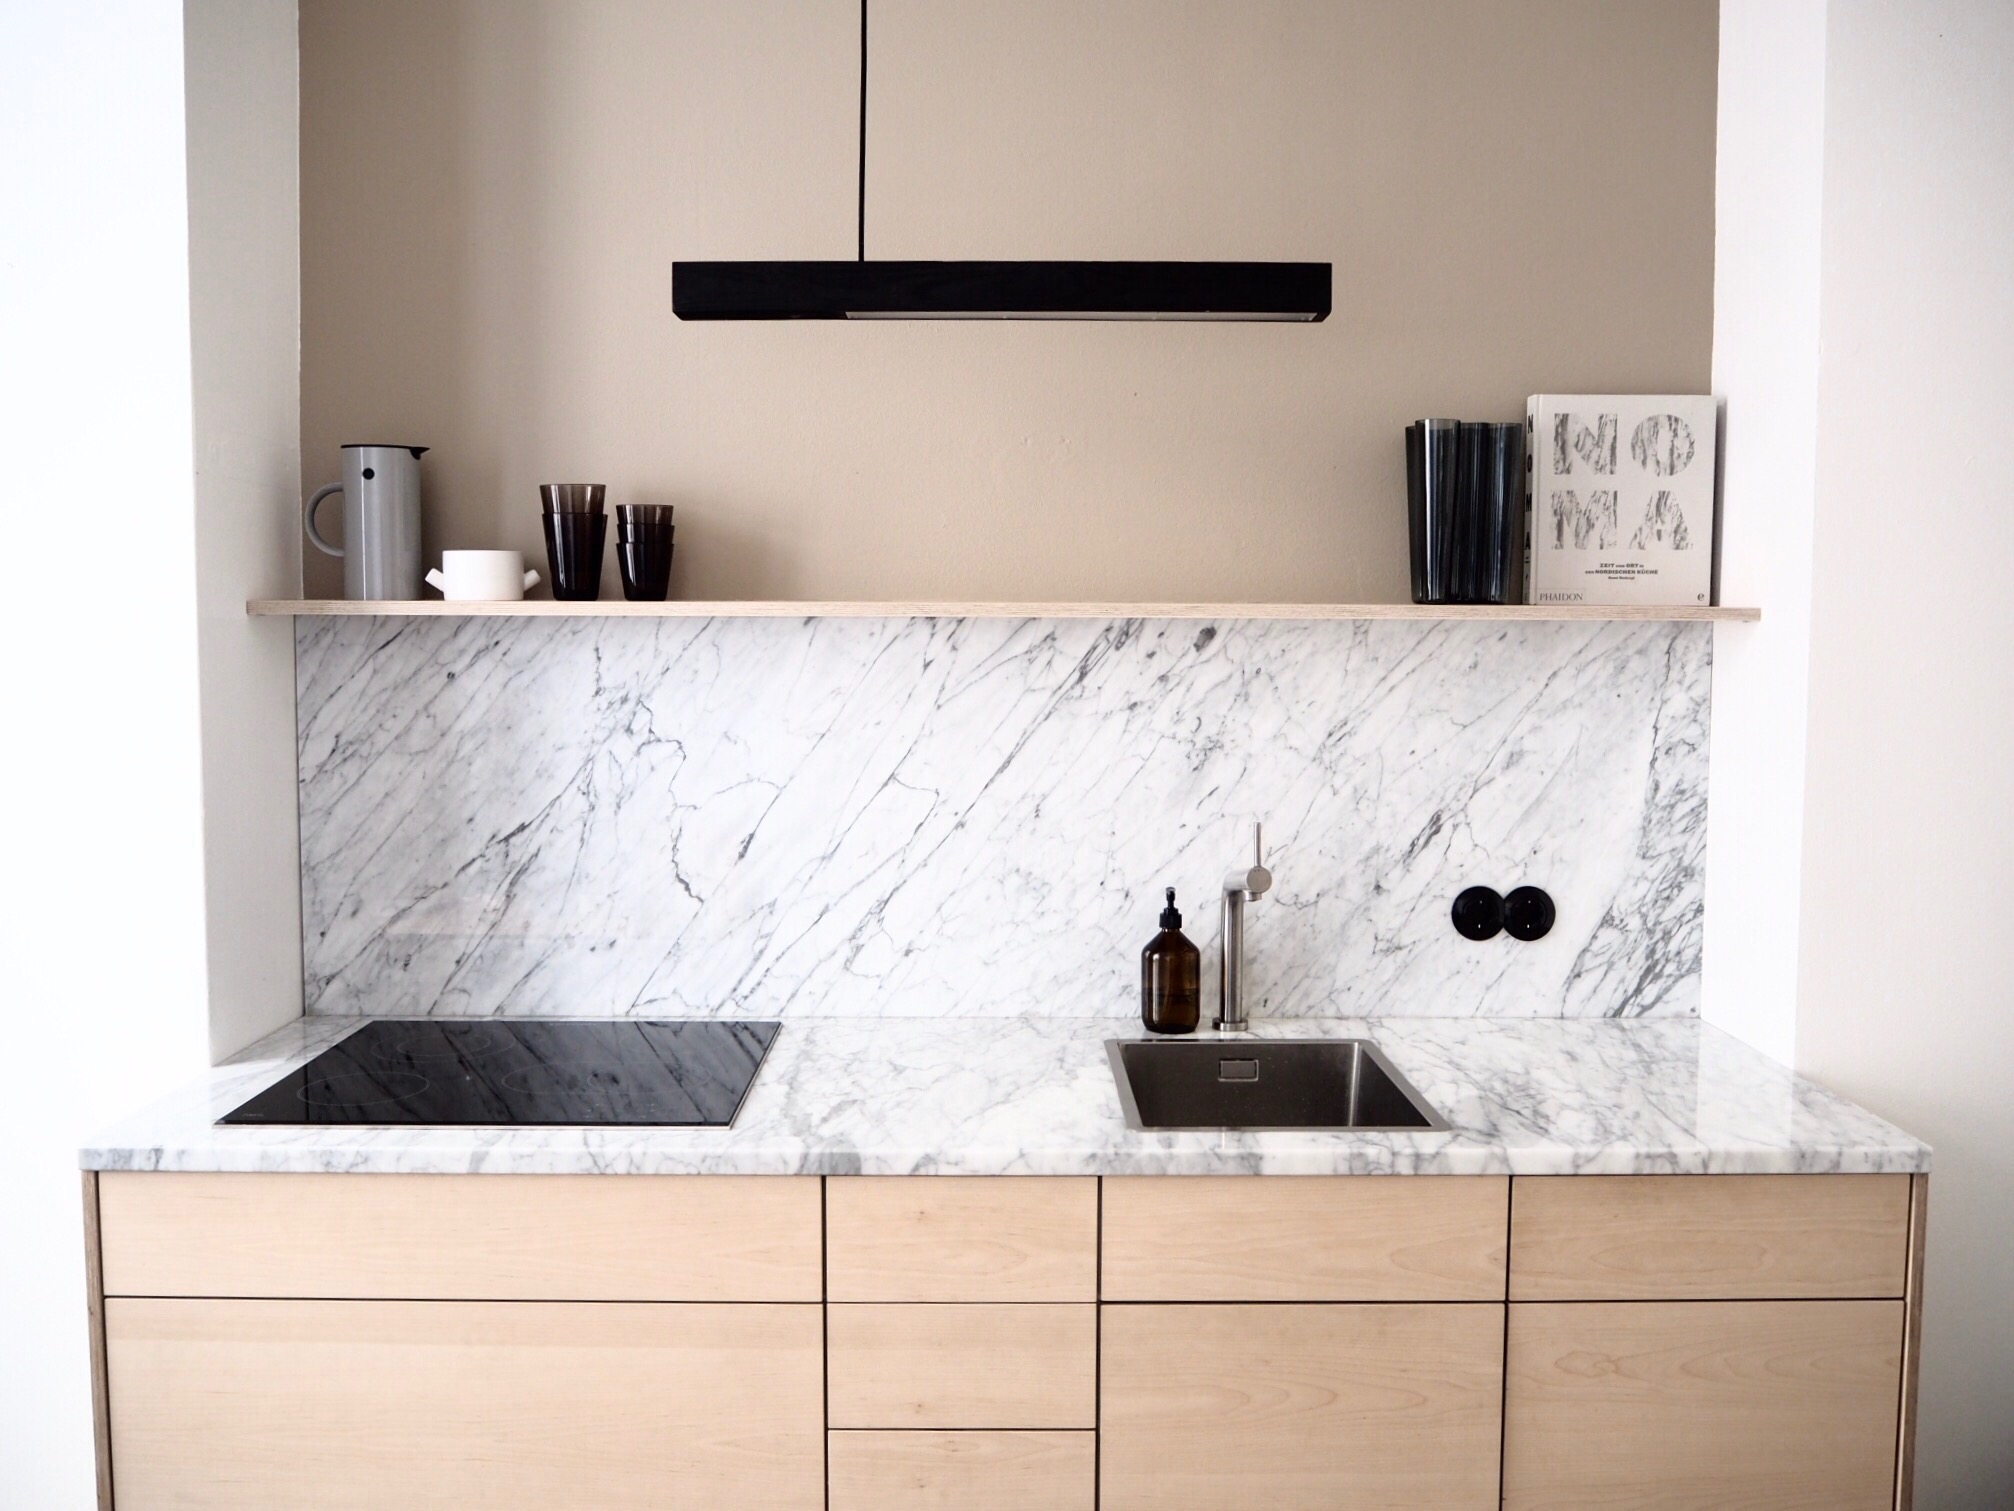 Selina Lauck - home tour - marble and wood kitchen